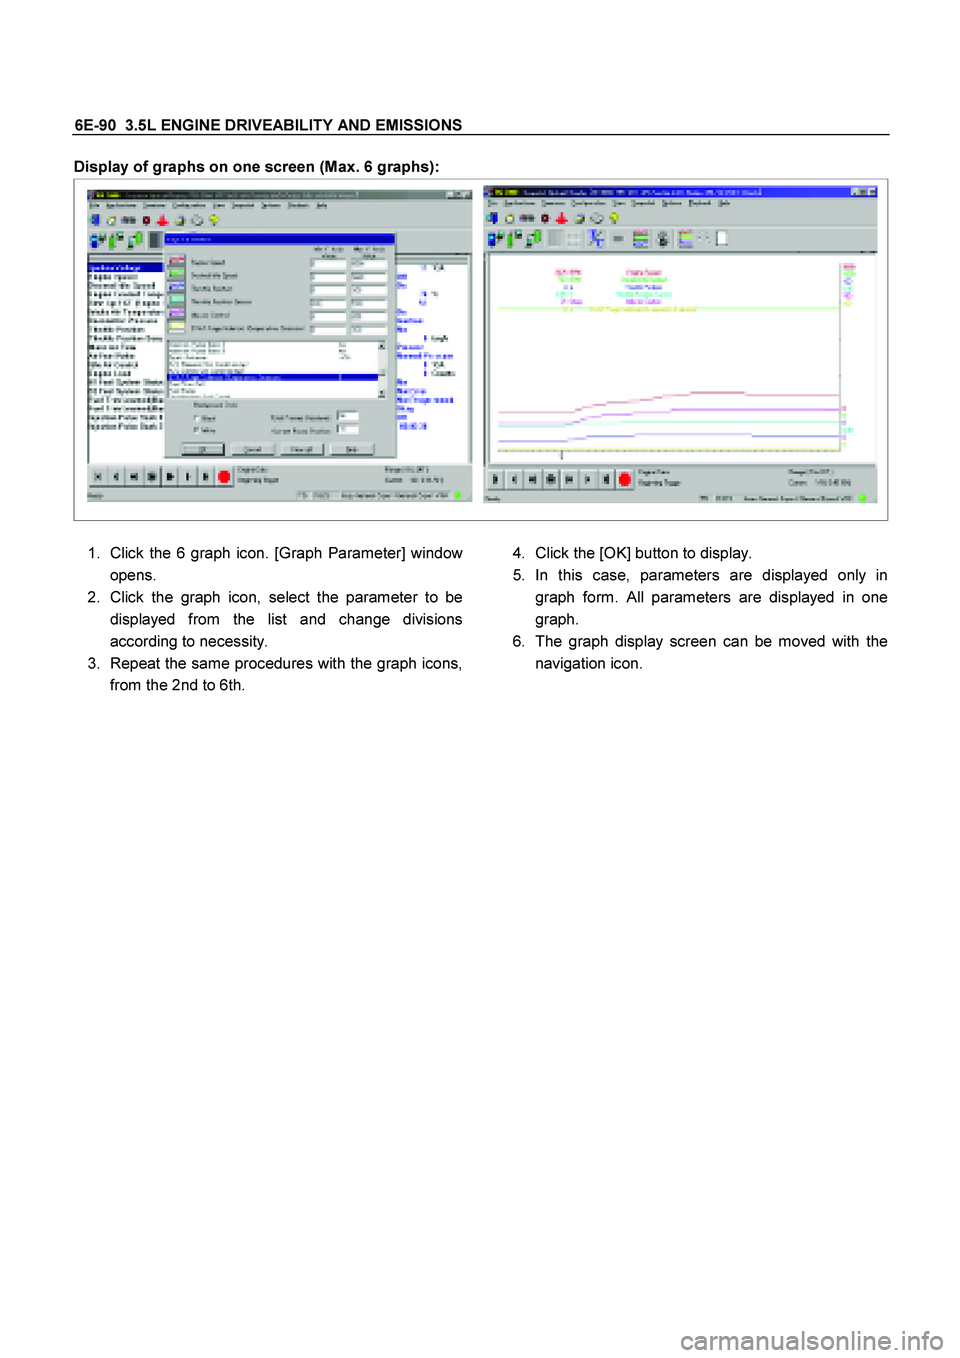 ISUZU TF SERIES 2004  Workshop Manual 6E-90  3.5L ENGINE DRIVEABILITY AND EMISSIONS
 
Display of graphs on one screen (Max. 6 graphs):
 
 
 
 
1. 
Click the 6 graph icon. [Graph Parameter] window
opens. 
2. 
Click the graph icon, select t